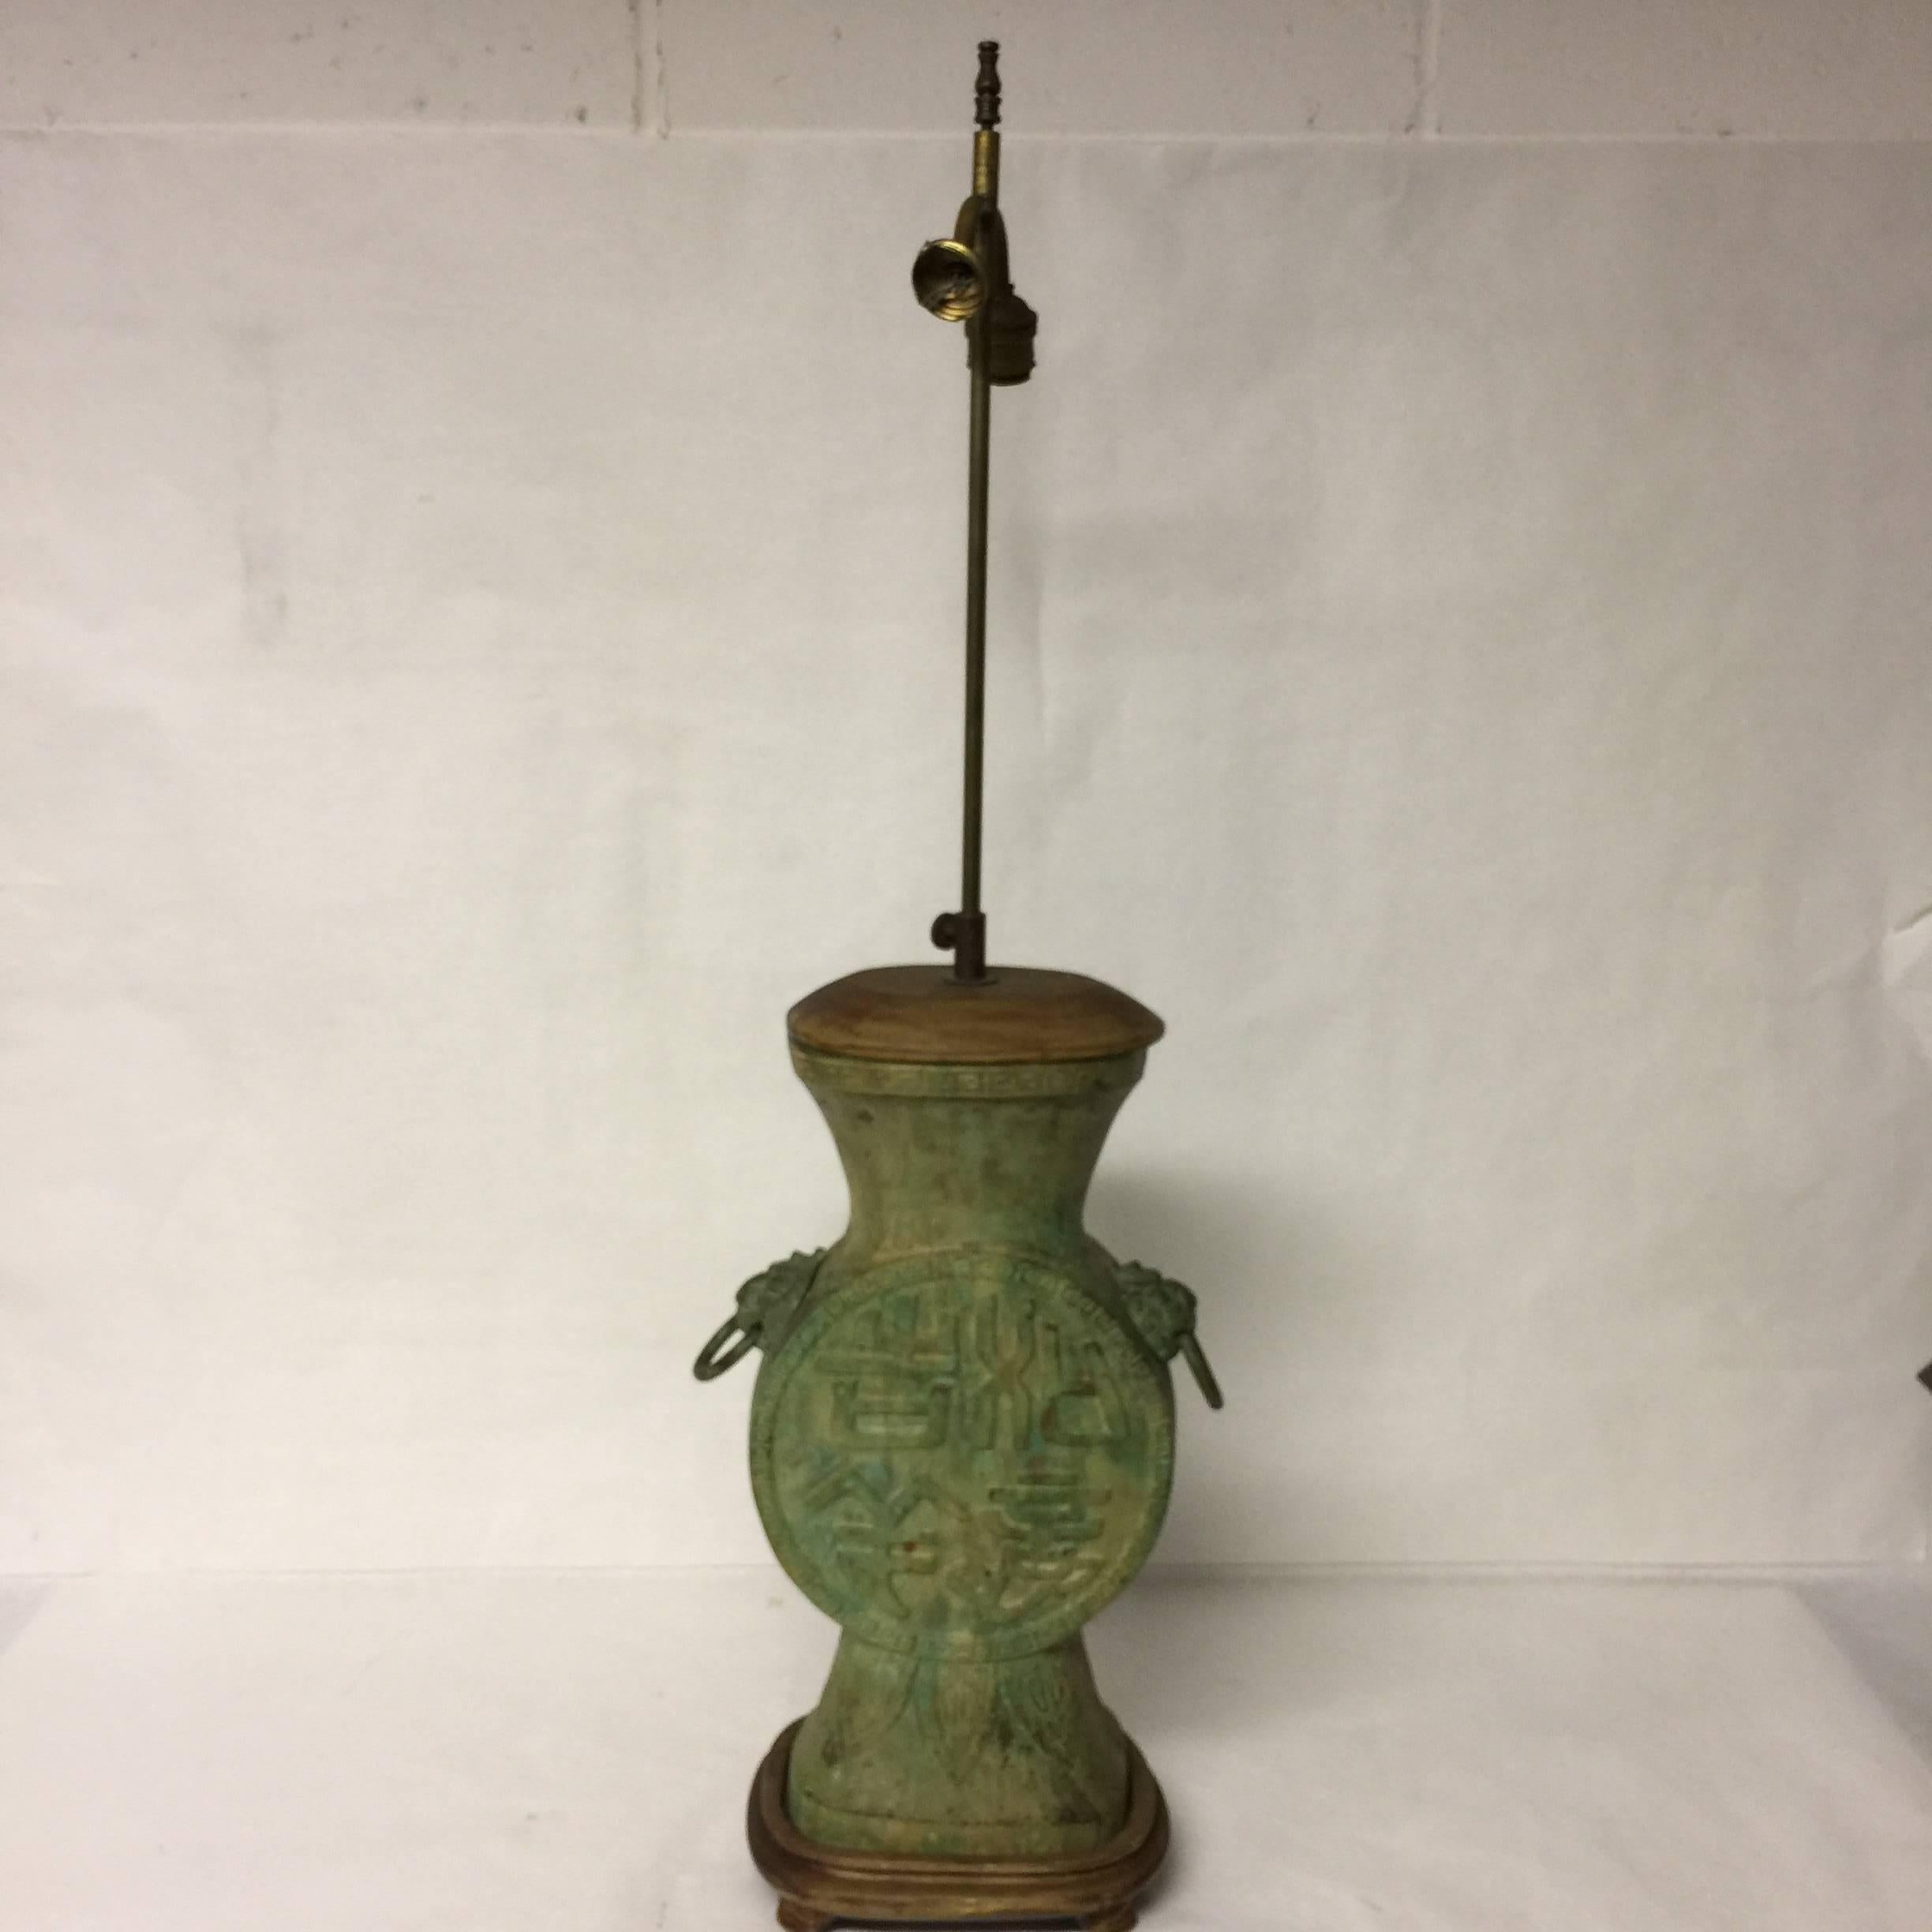 In the style of Frederick Cooper, this Asian Style, antique patina table lamp has a Greek key design, characters, lotus leaves. There are lion heads with rings in their mouths on either side. The lamp sits atop a wooden base and has a wooden top.